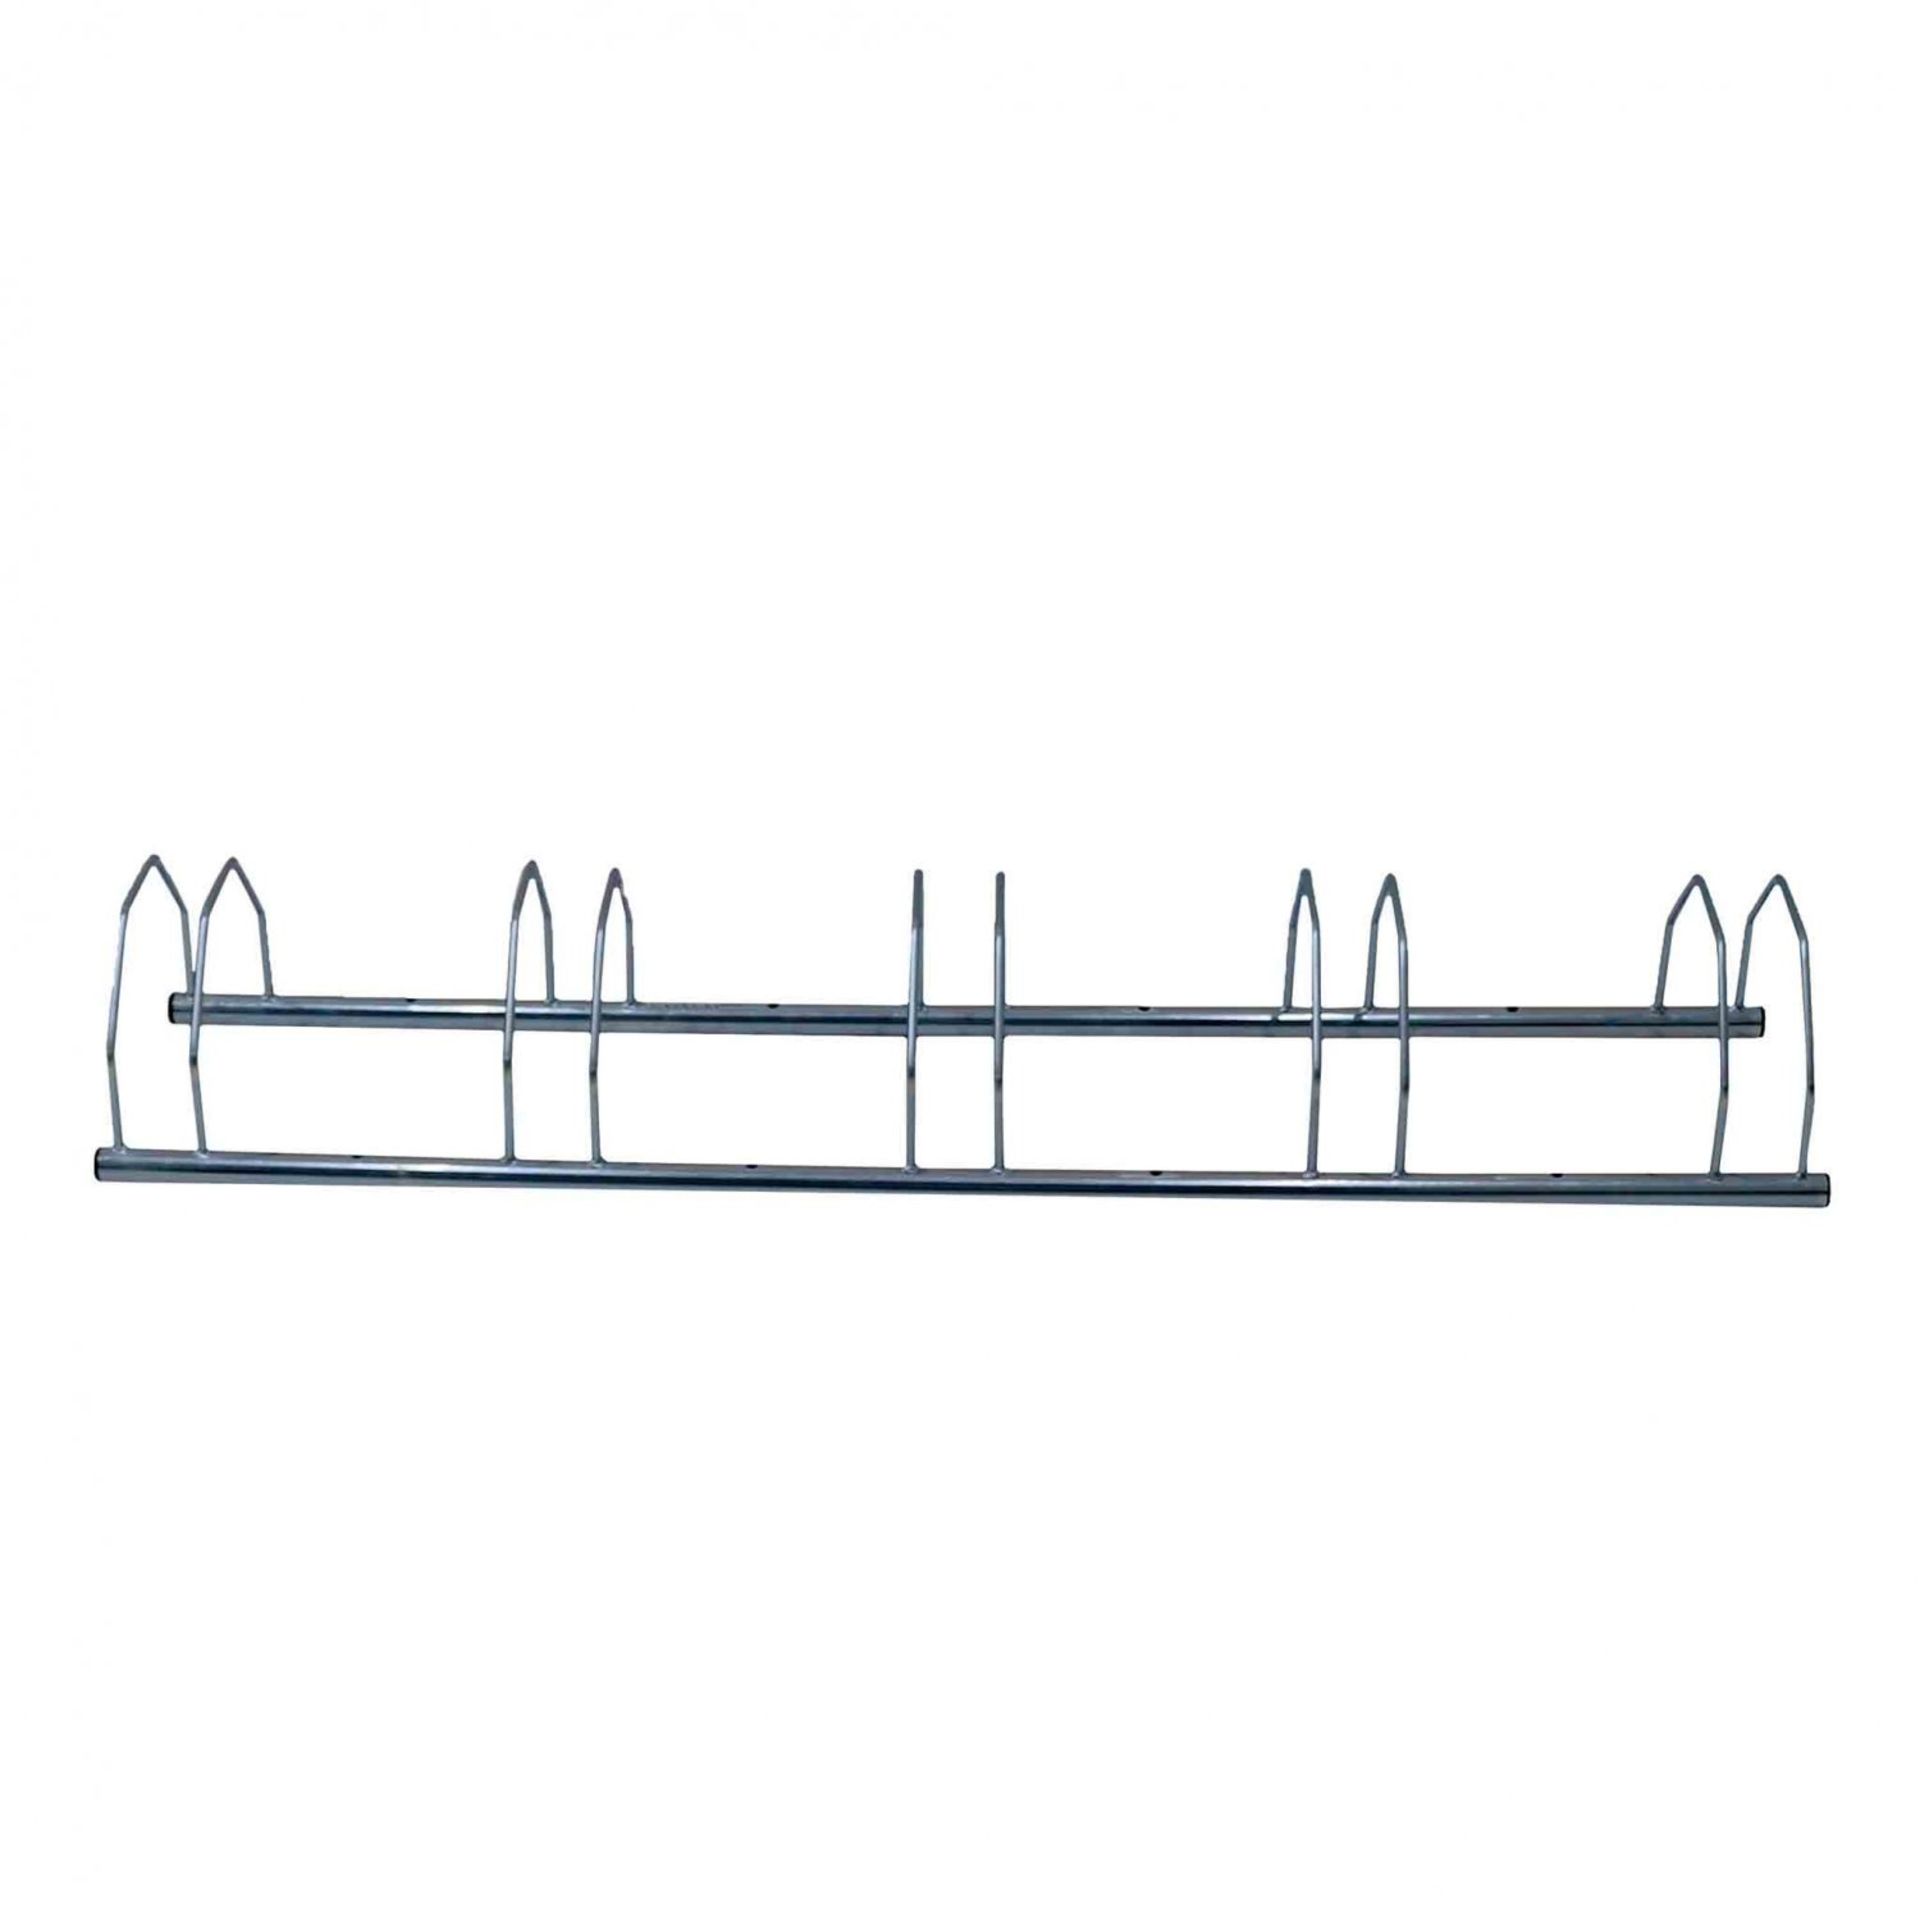 (SK40) 5 Five Slot Metal Bike Stand Bicycle Storage Rack Make storing your bikes easy with t... - Image 2 of 2